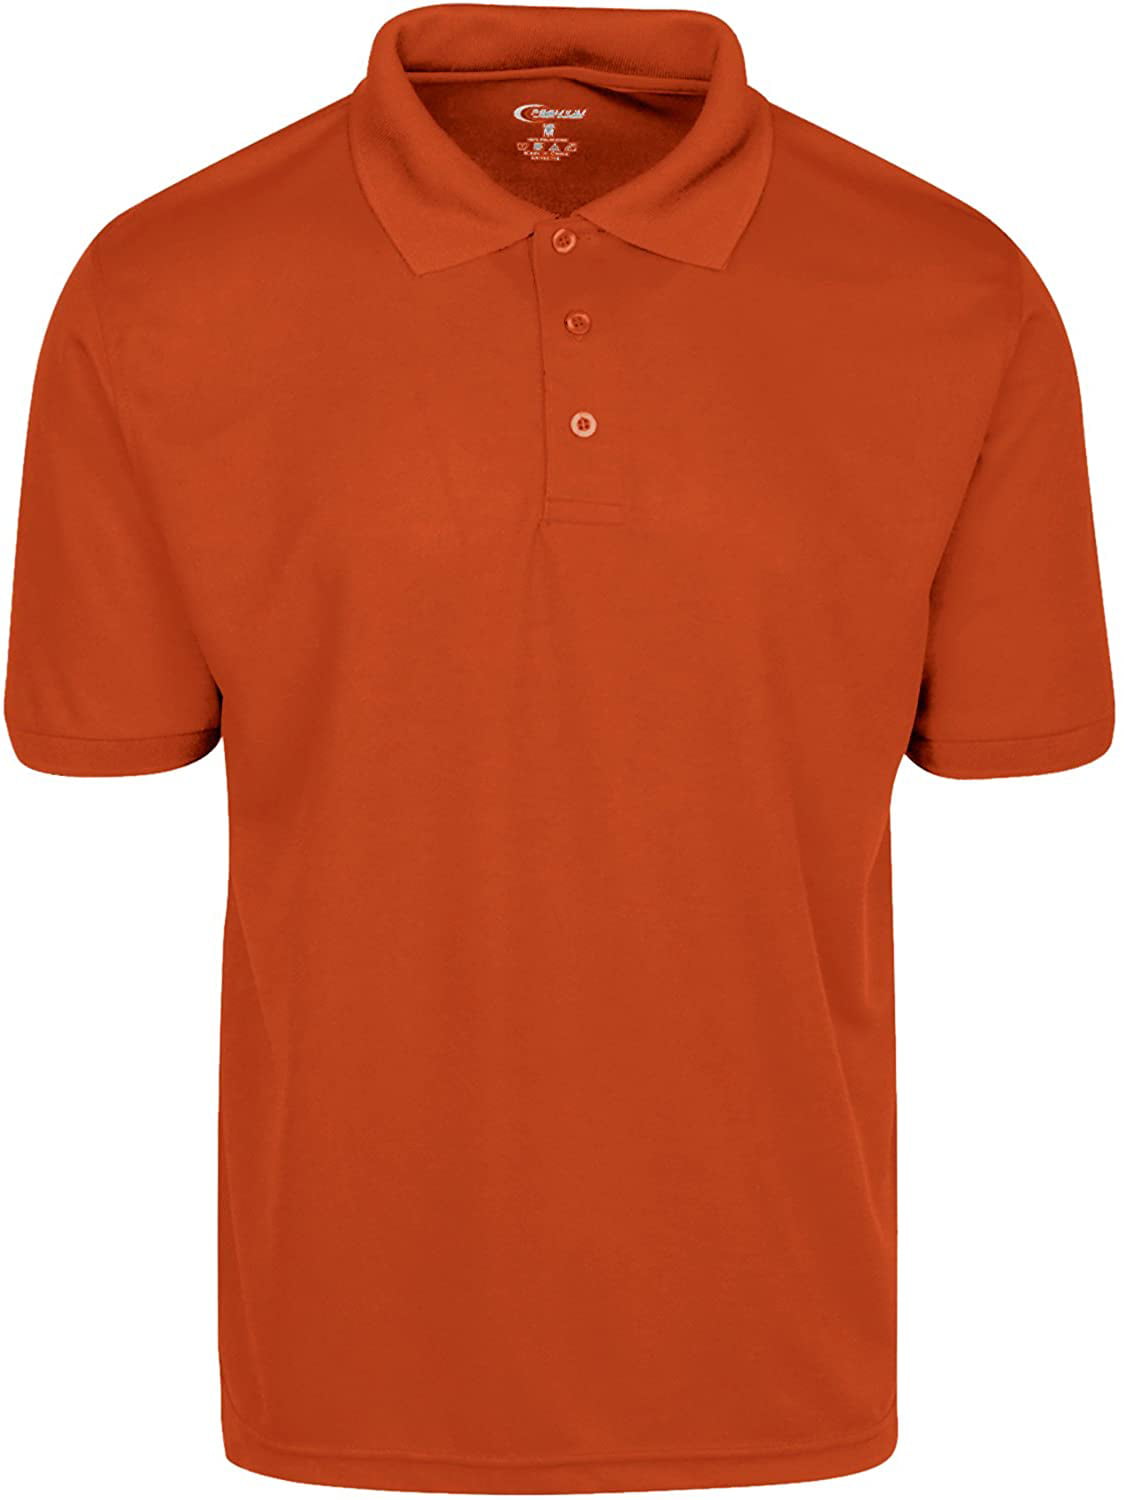 Buy > polo dri fit t shirts > in stock